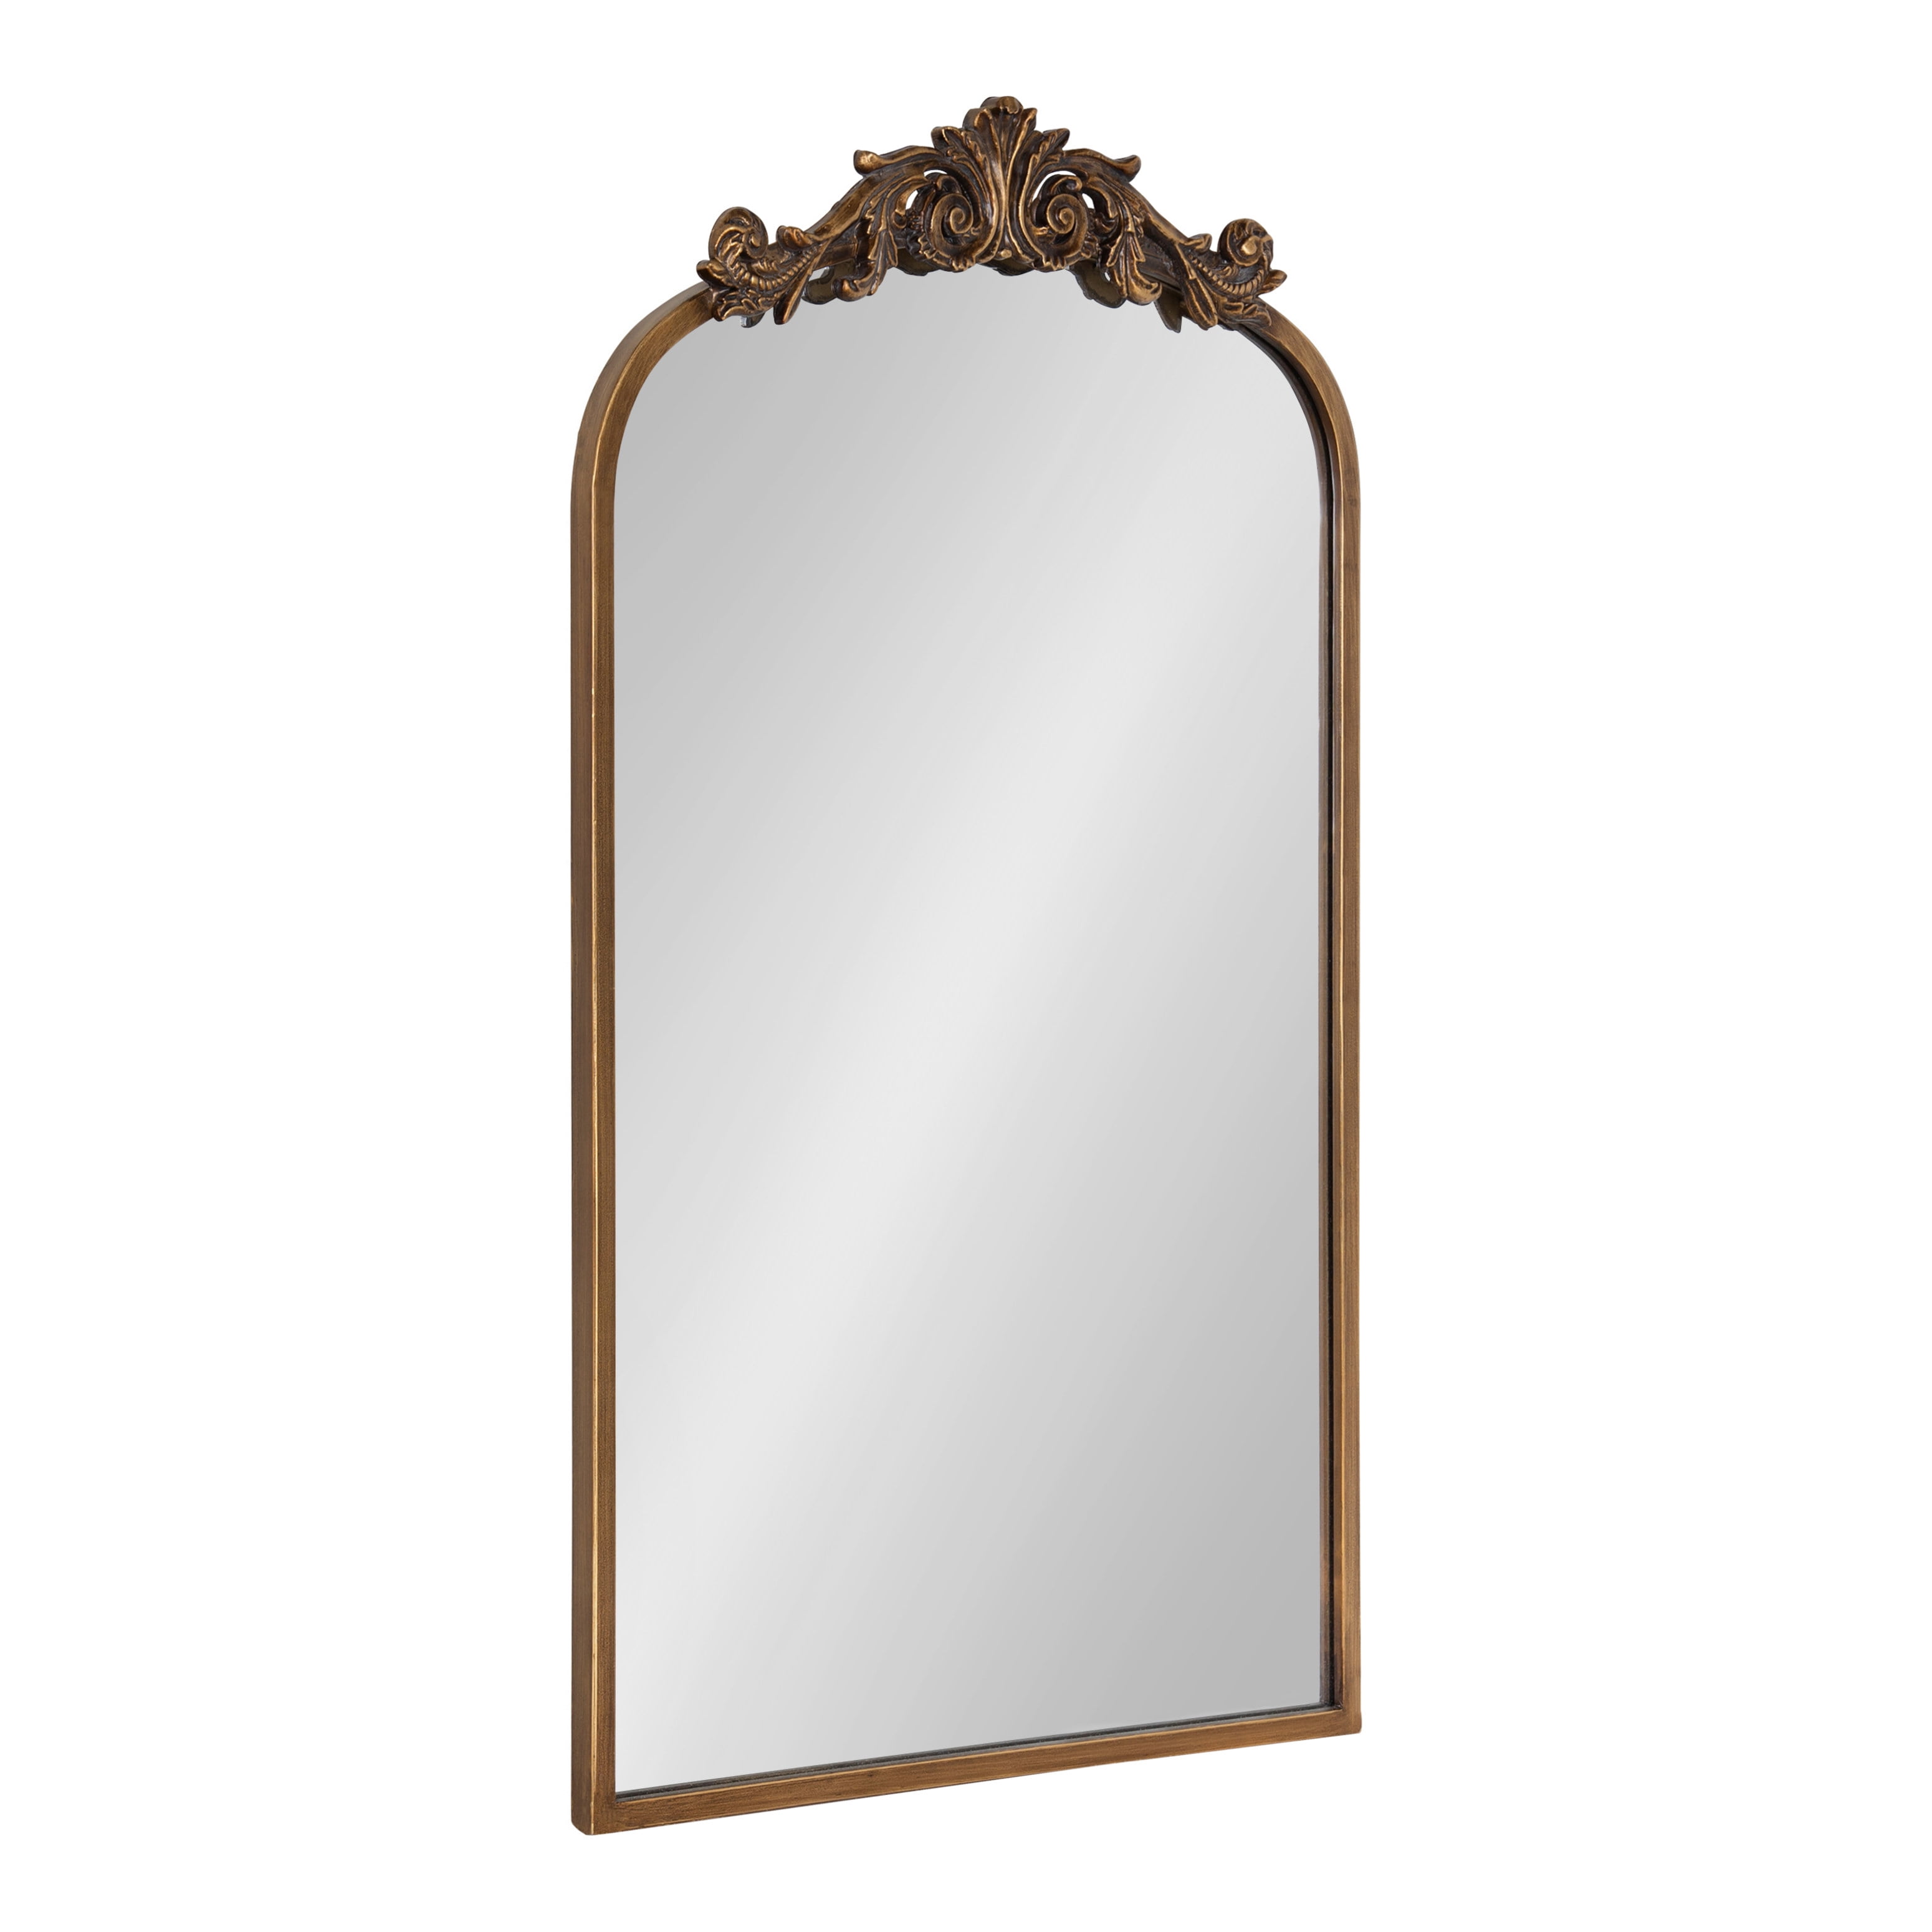 Rectangular Gold Wall Mirror Traditional Hooks Included 